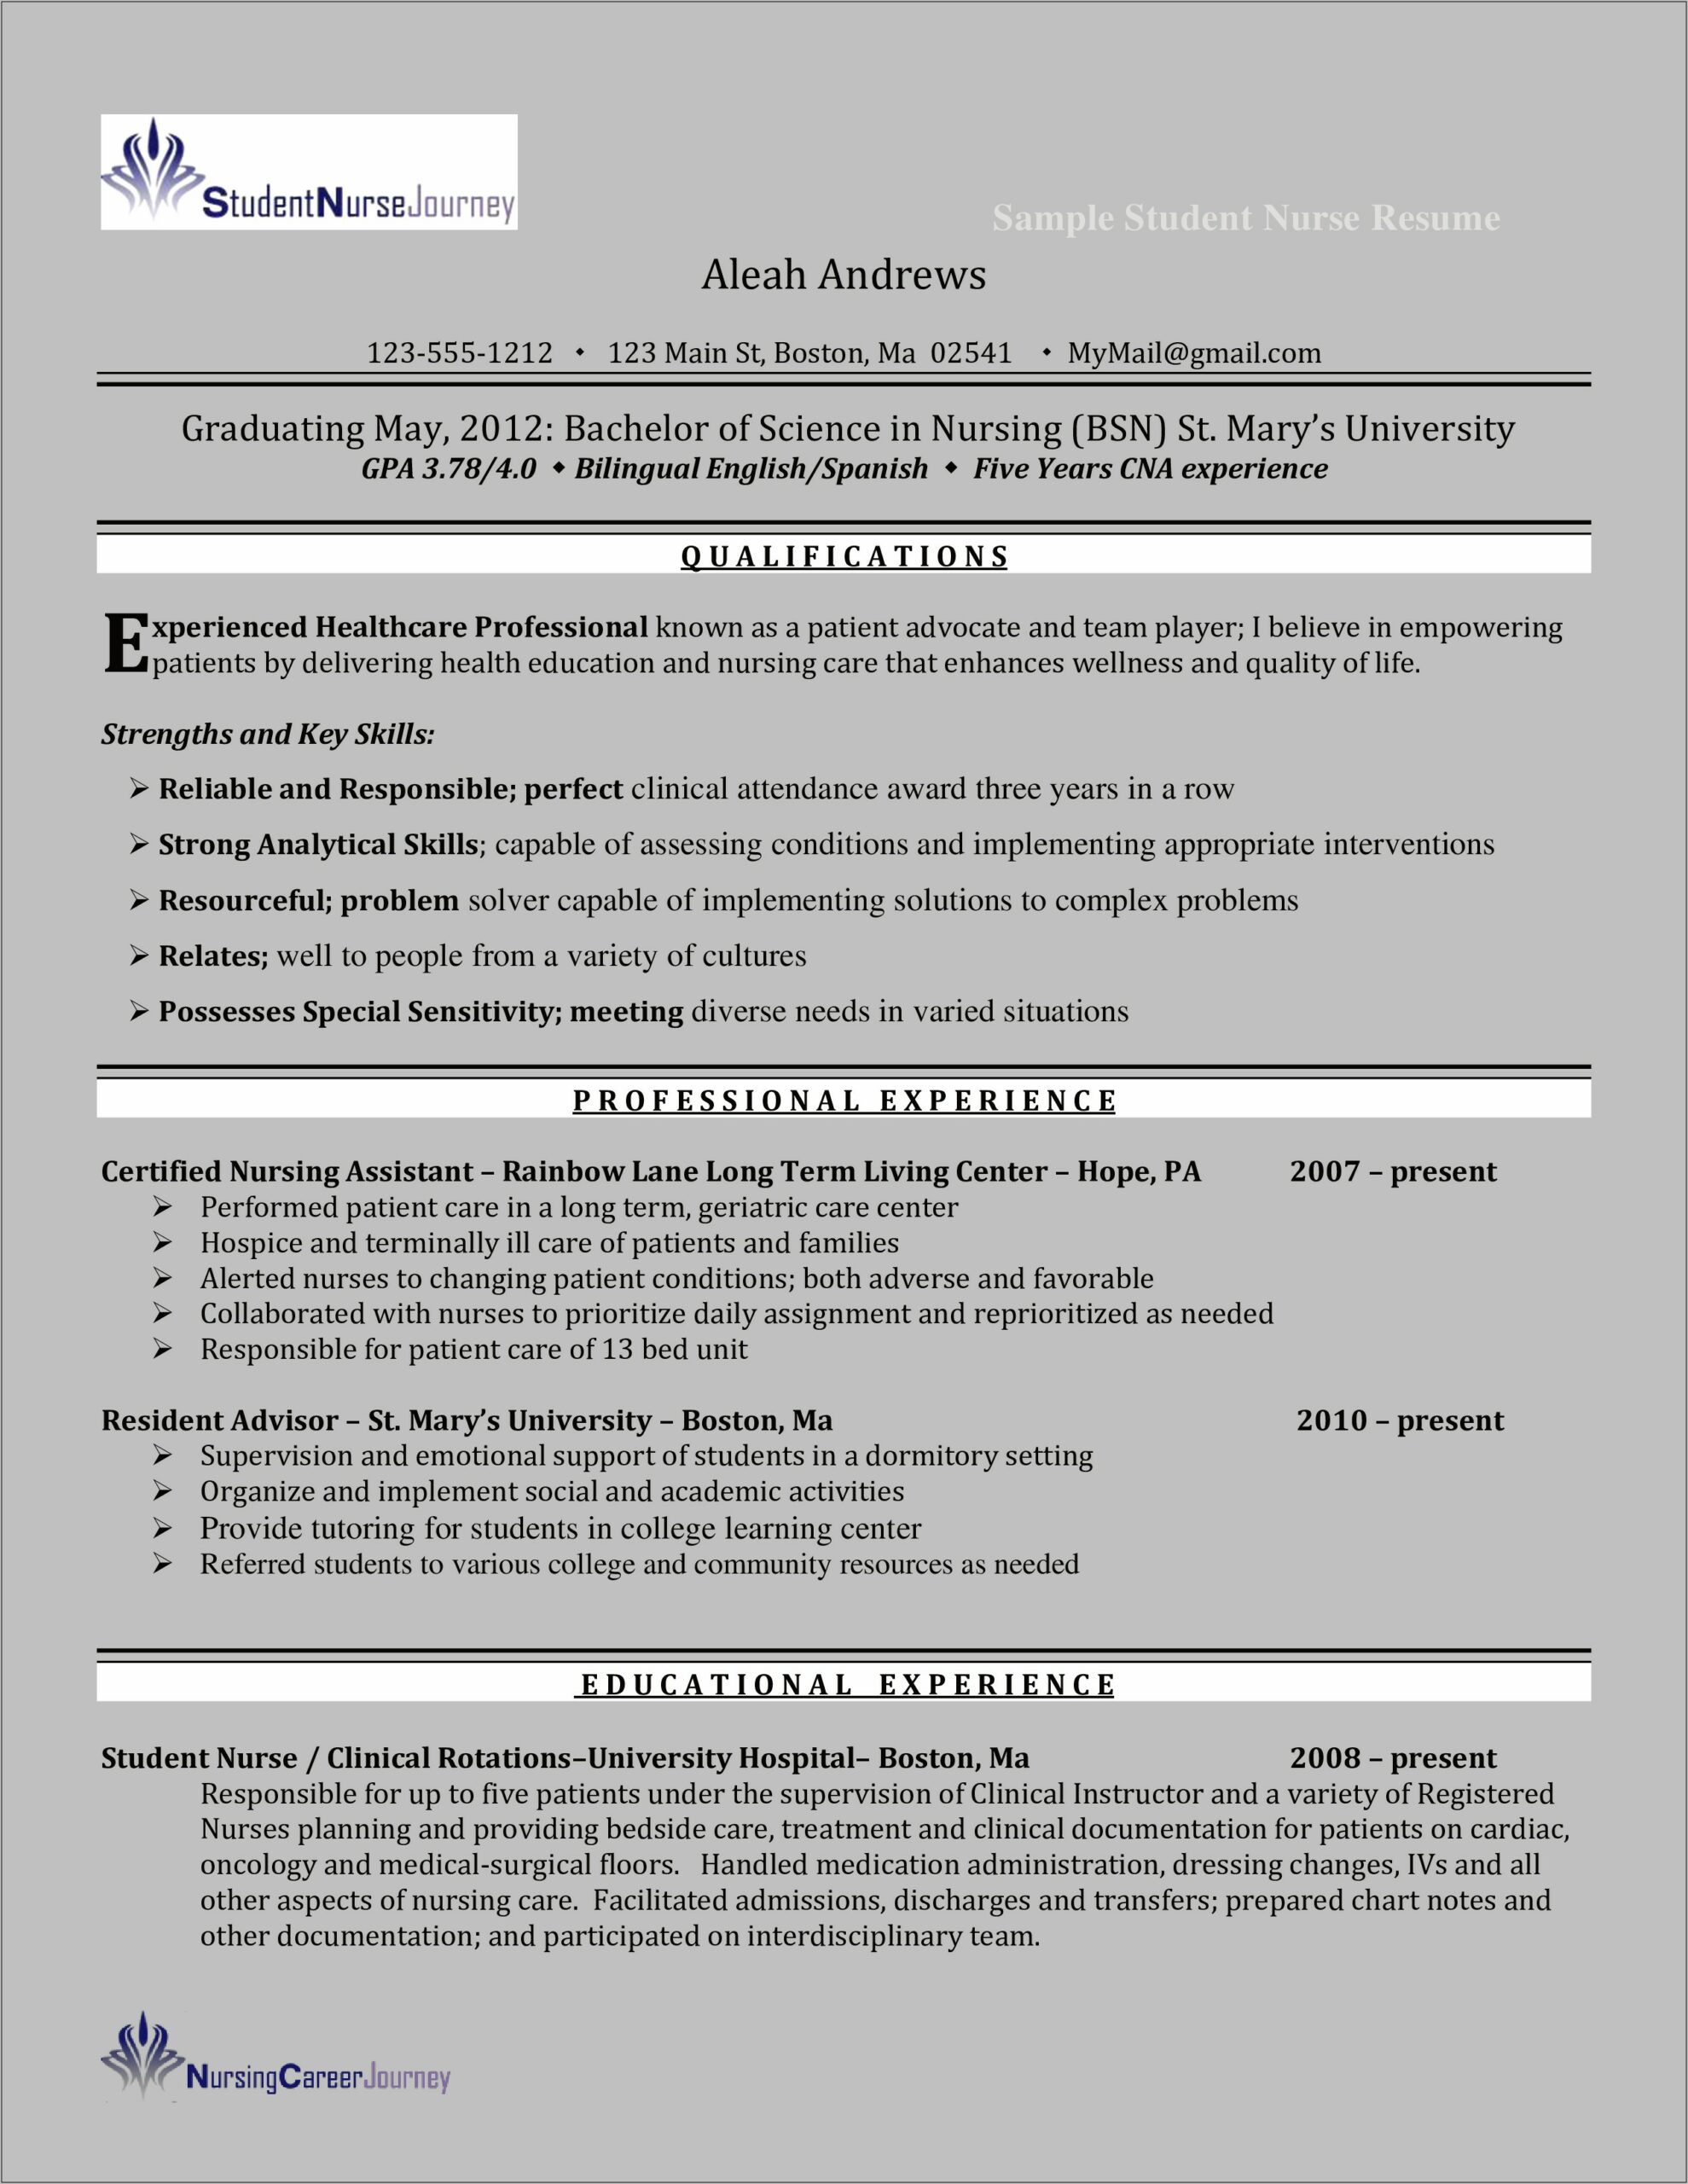 Certified Nursing Assistant Resume With Experience